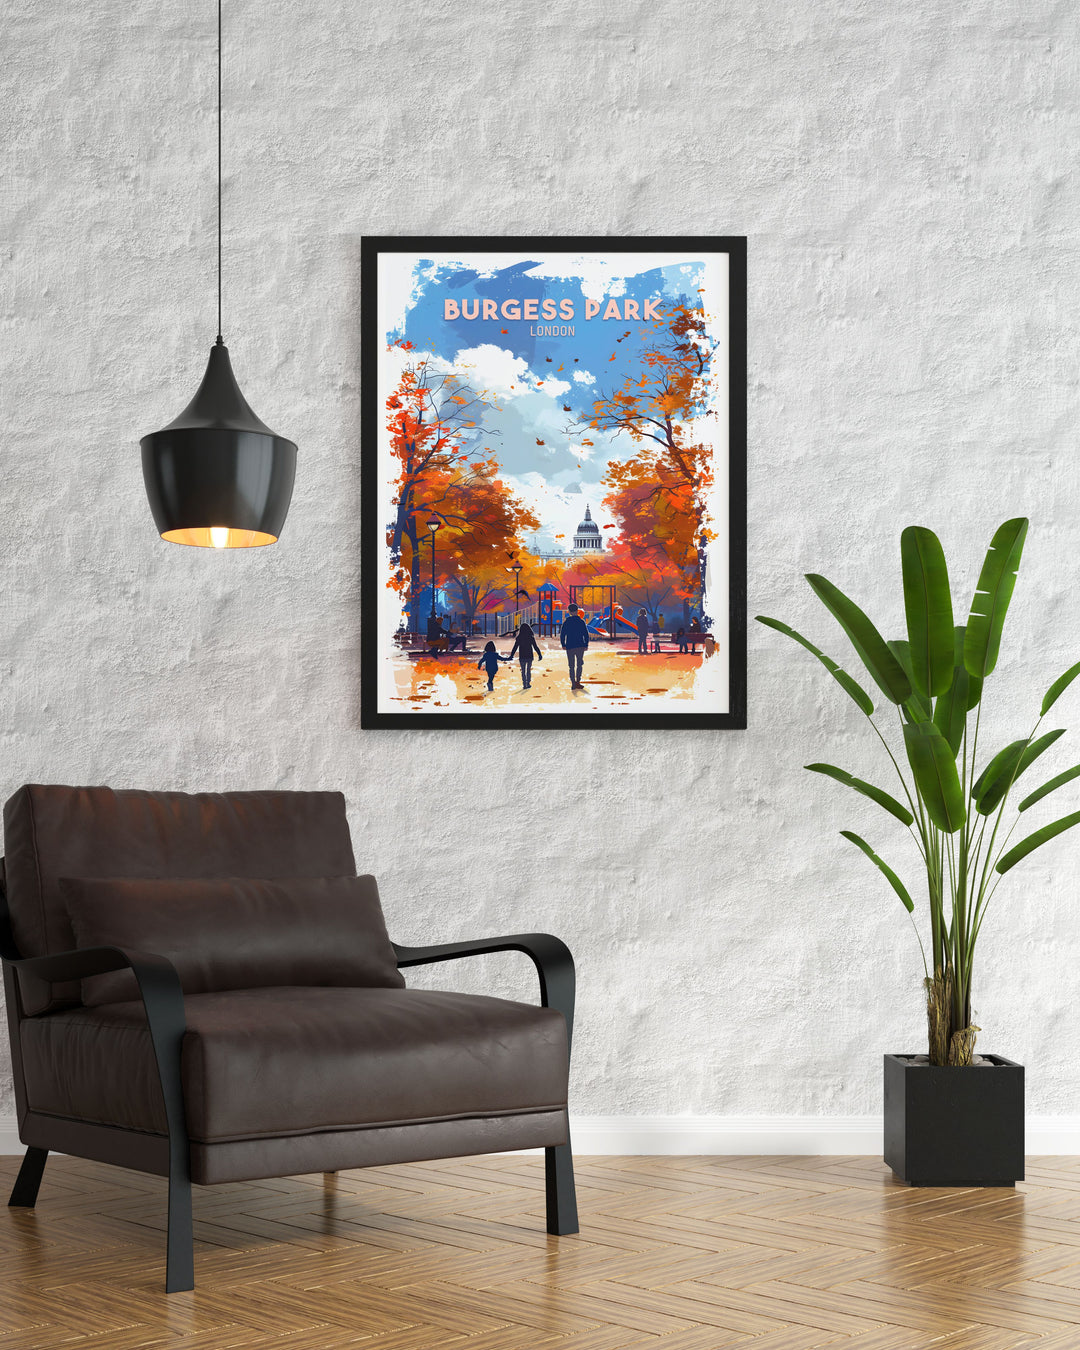 Vintage style poster of Burgess Park in London, featuring the dynamic playground scene, blending the charm of nostalgia with contemporary design, perfect for enhancing your living space with a piece of urban green beauty.